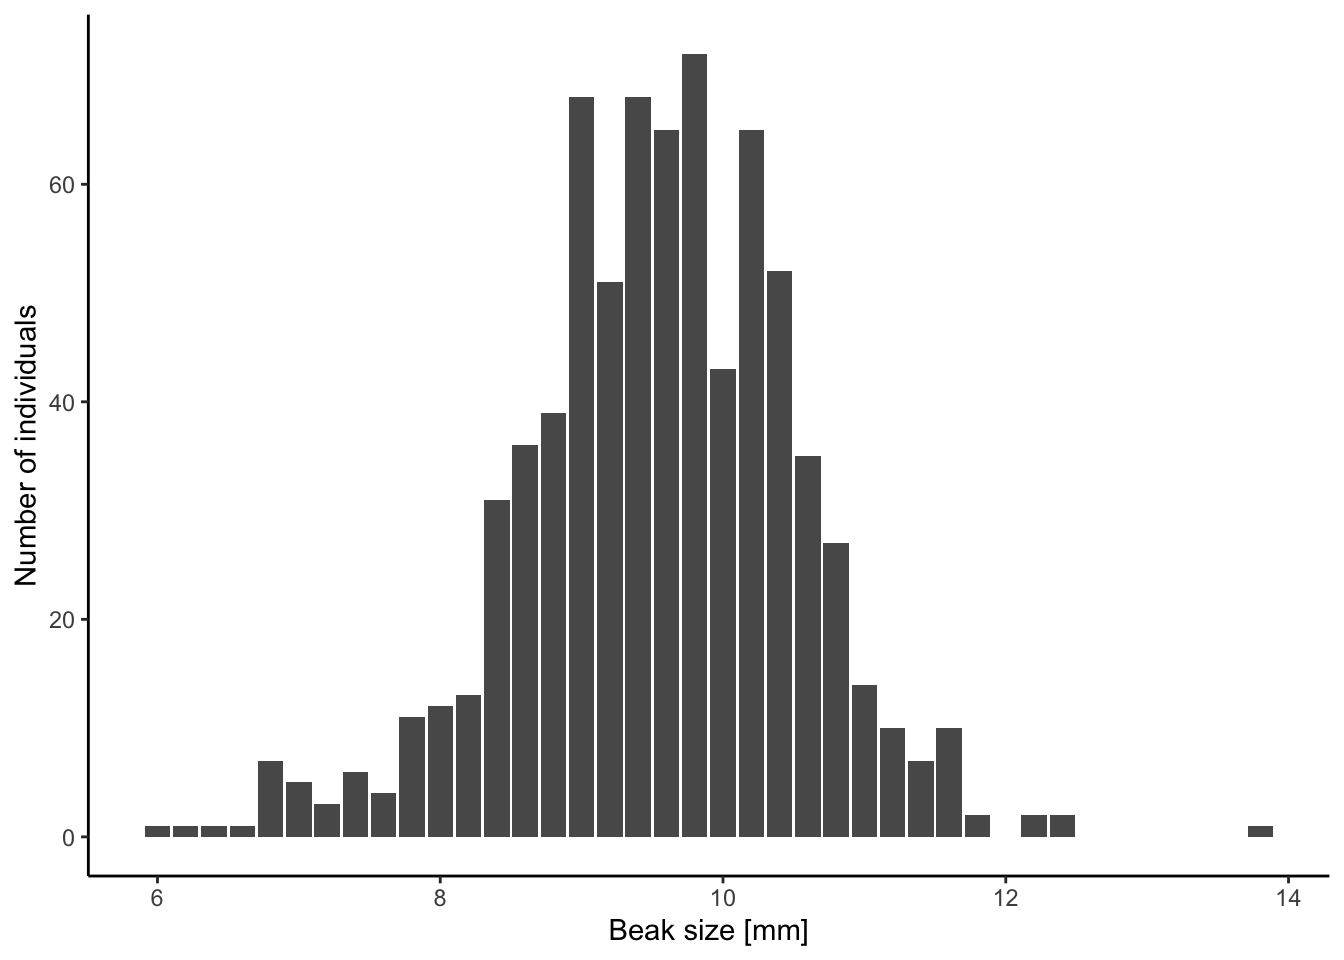 Frequency histogram showing beak size variation in the *G. fortis* population before the drought in 1976. [Data](data/3_beak_size_variation.csv) from Boag and Grant (1984).